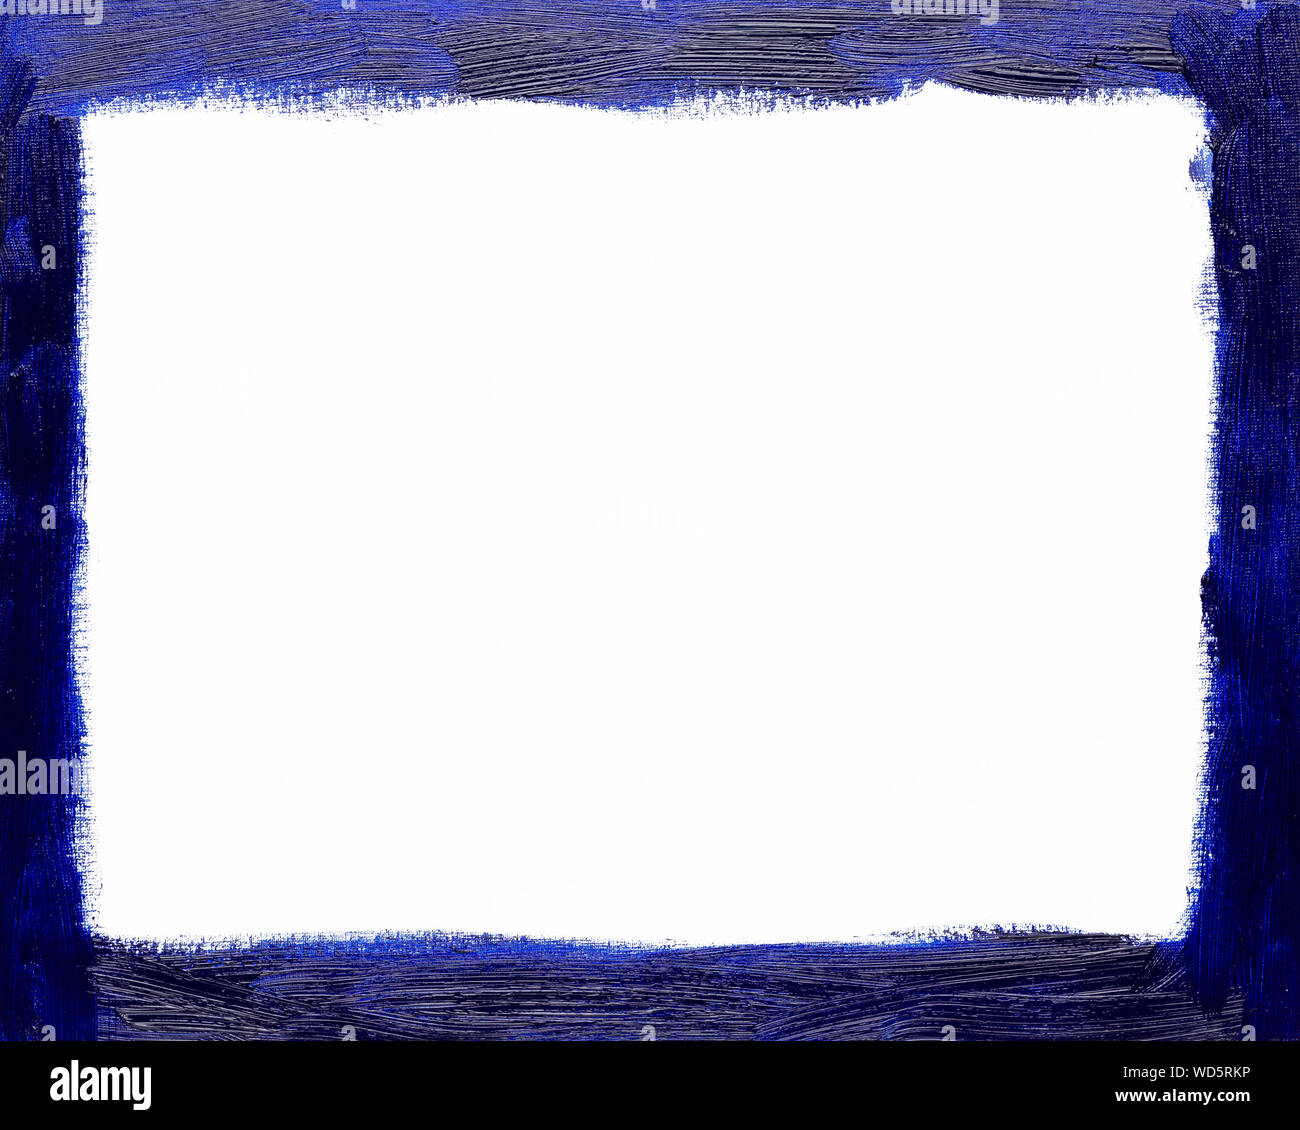 Rectangular blue picture frame painted background isolated on white background. Painted with real oil color by hand on canvas. Stock Photo